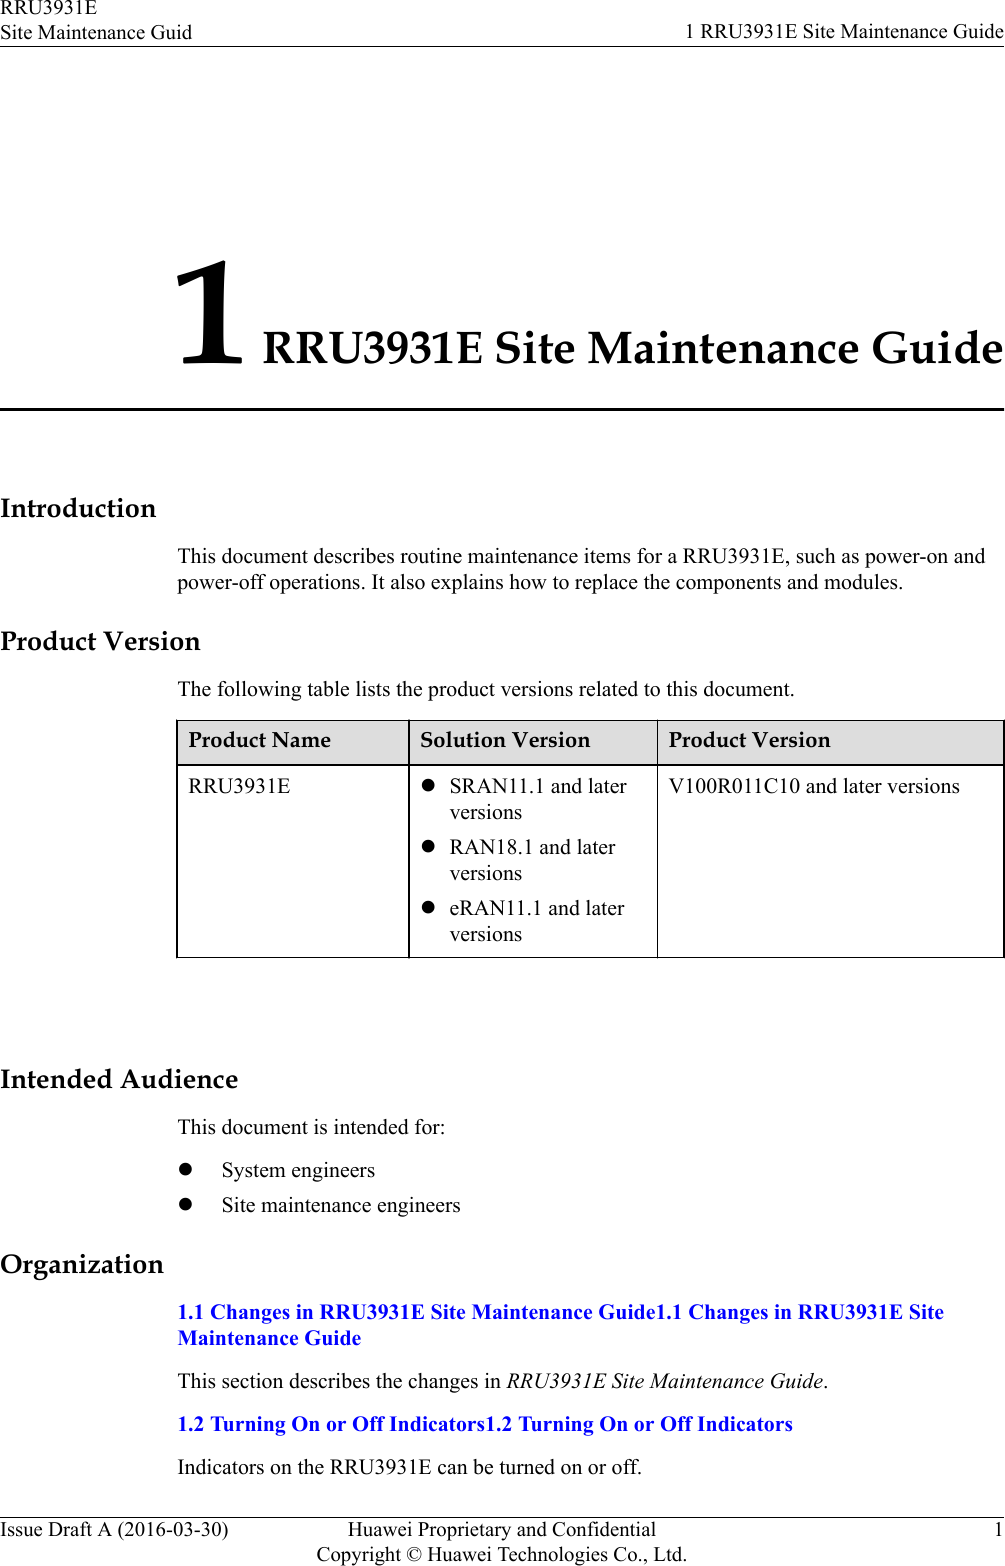 1 RRU3931E Site Maintenance GuideIntroductionThis document describes routine maintenance items for a RRU3931E, such as power-on andpower-off operations. It also explains how to replace the components and modules.Product VersionThe following table lists the product versions related to this document.Product Name Solution Version Product VersionRRU3931E lSRAN11.1 and laterversionslRAN18.1 and laterversionsleRAN11.1 and laterversionsV100R011C10 and later versions Intended AudienceThis document is intended for:lSystem engineerslSite maintenance engineersOrganization1.1 Changes in RRU3931E Site Maintenance Guide1.1 Changes in RRU3931E SiteMaintenance GuideThis section describes the changes in RRU3931E Site Maintenance Guide.1.2 Turning On or Off Indicators1.2 Turning On or Off IndicatorsIndicators on the RRU3931E can be turned on or off.RRU3931ESite Maintenance Guid 1 RRU3931E Site Maintenance GuideIssue Draft A (2016-03-30) Huawei Proprietary and ConfidentialCopyright © Huawei Technologies Co., Ltd.1